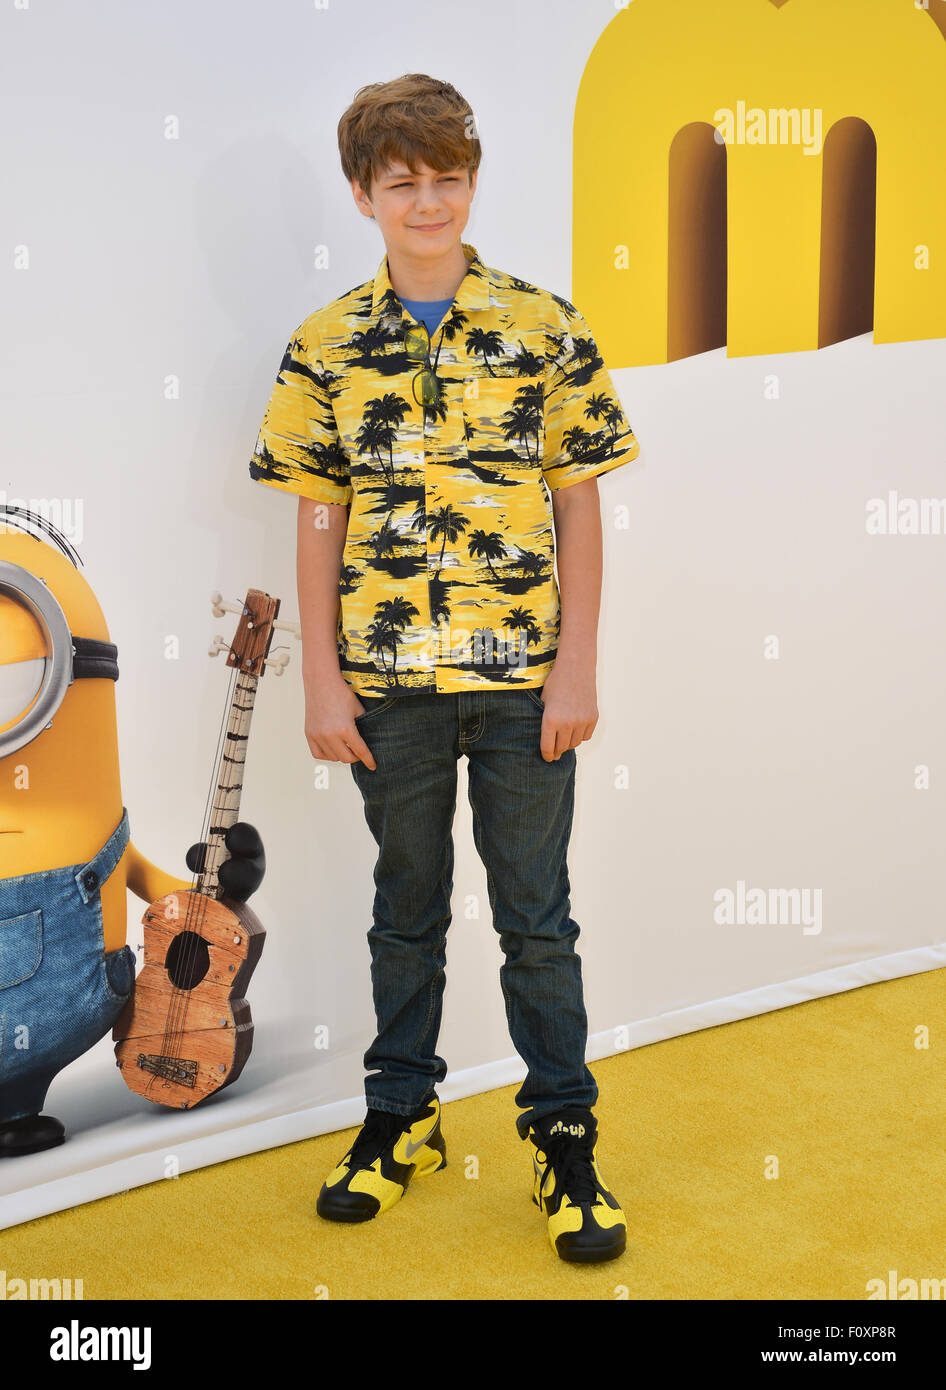 LOS ANGELES, CA - JUNE 27, 2015: Actor Ty Simpkins at the Los Angeles premiere of "Minions" at the Shrine Auditorium. Stock Photo